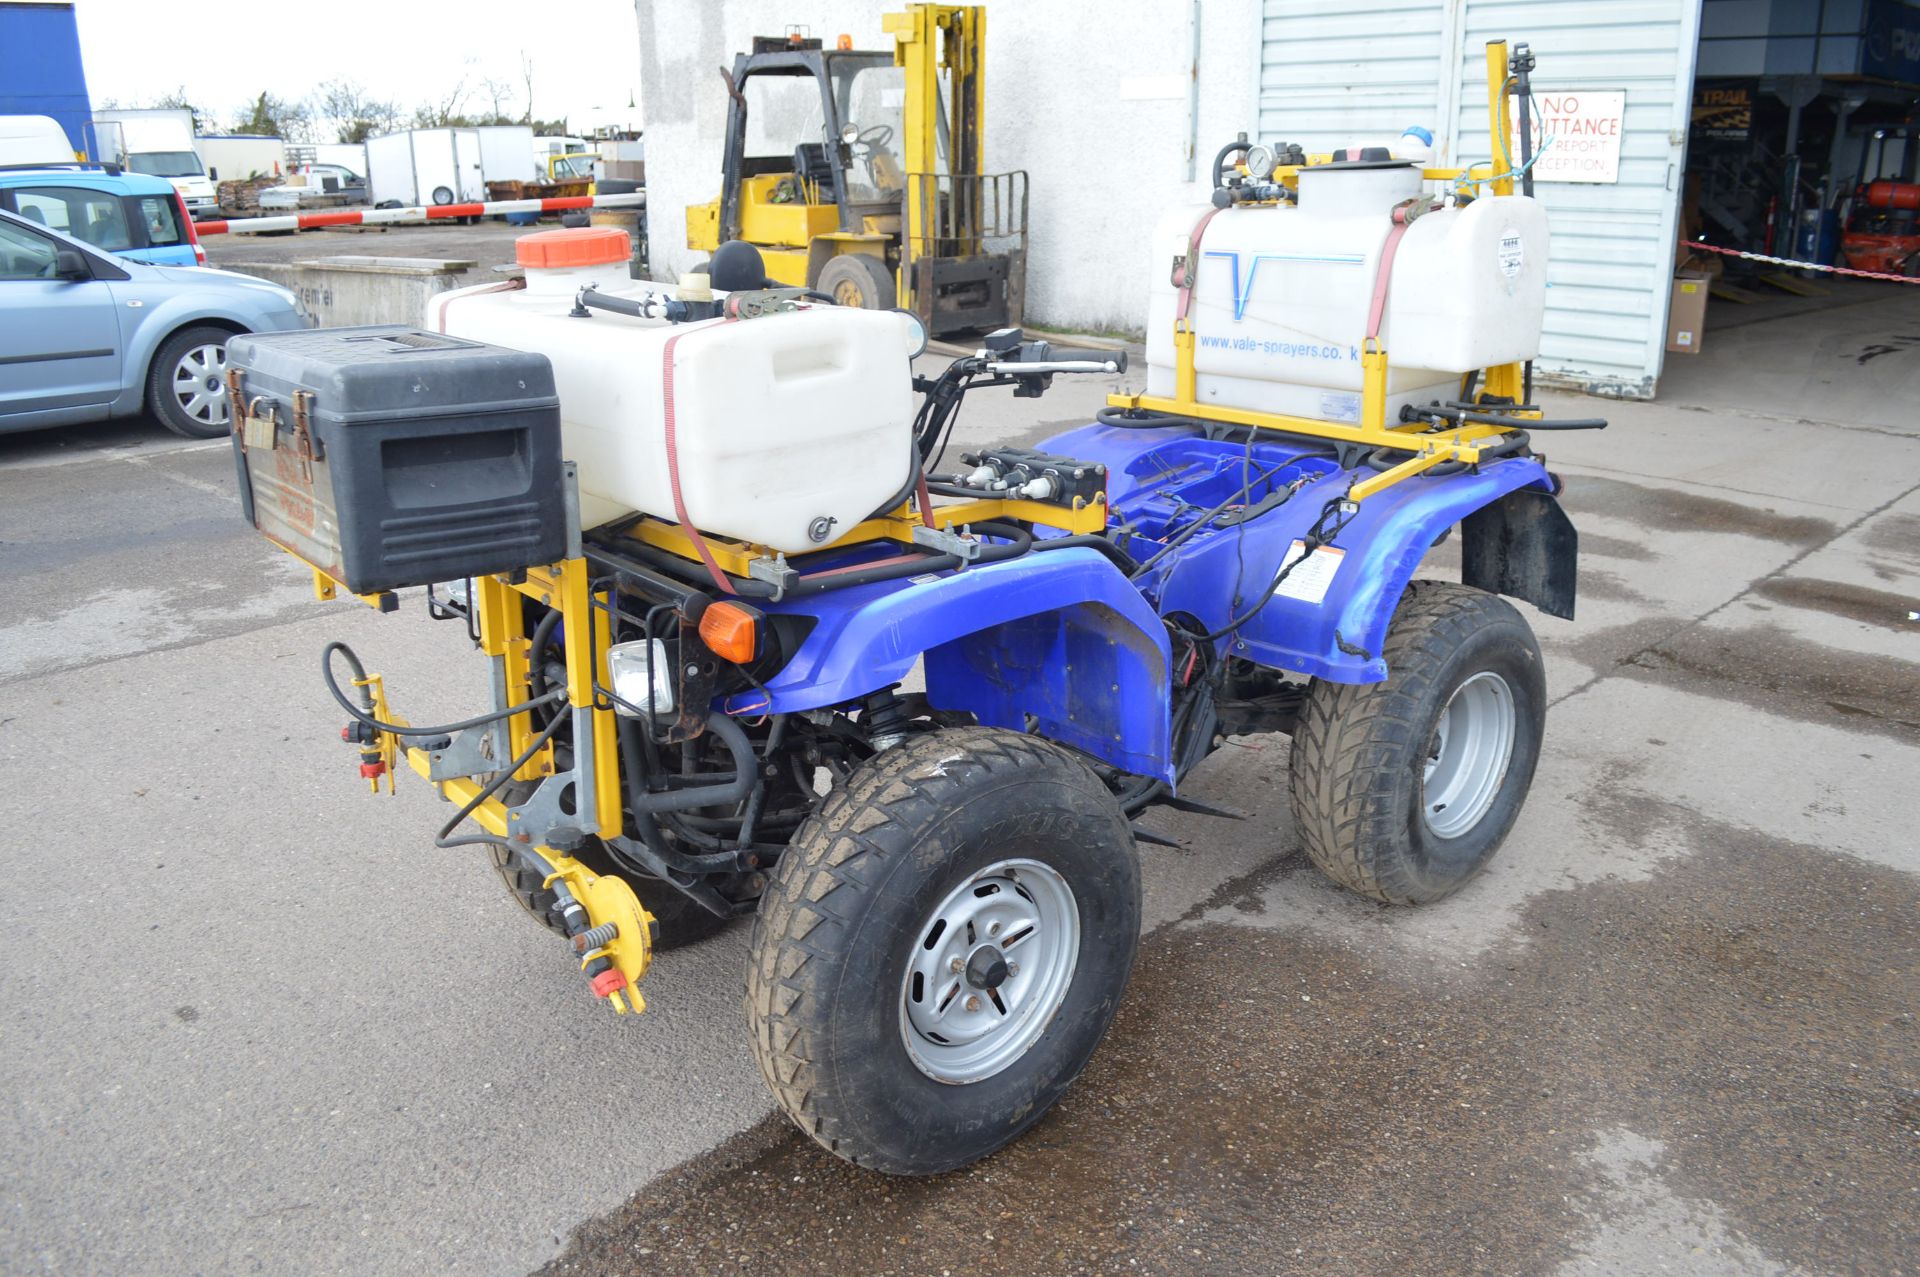 2009 YAMAHA QUAD BIKE WITH 2 SPRAYERS - 1 OWNER FROM NEW - Image 4 of 22